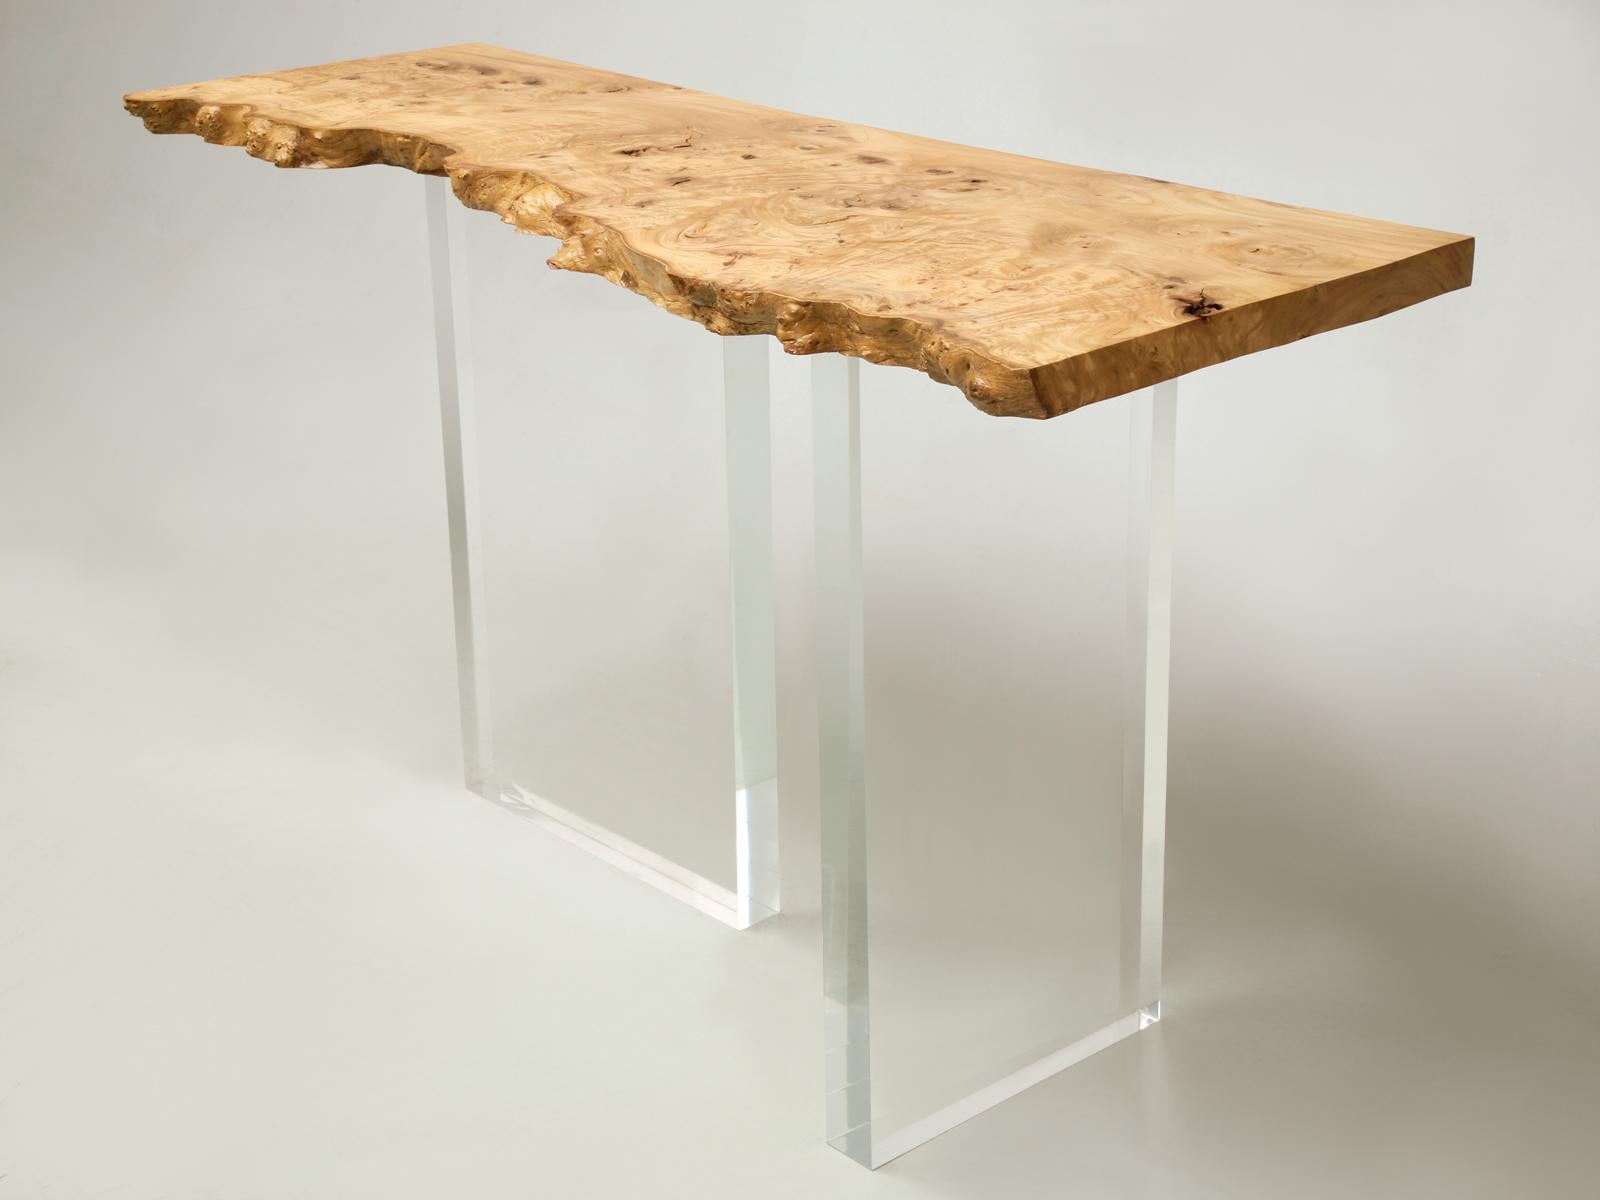 Custom hand-made burl elmwood and acrylic console table made in our Old Plank workshop. Our craftsmen collaborated with one of Chicago's best known design firms to produce this custom acrylic and burl elmwood console table with a contemporary style